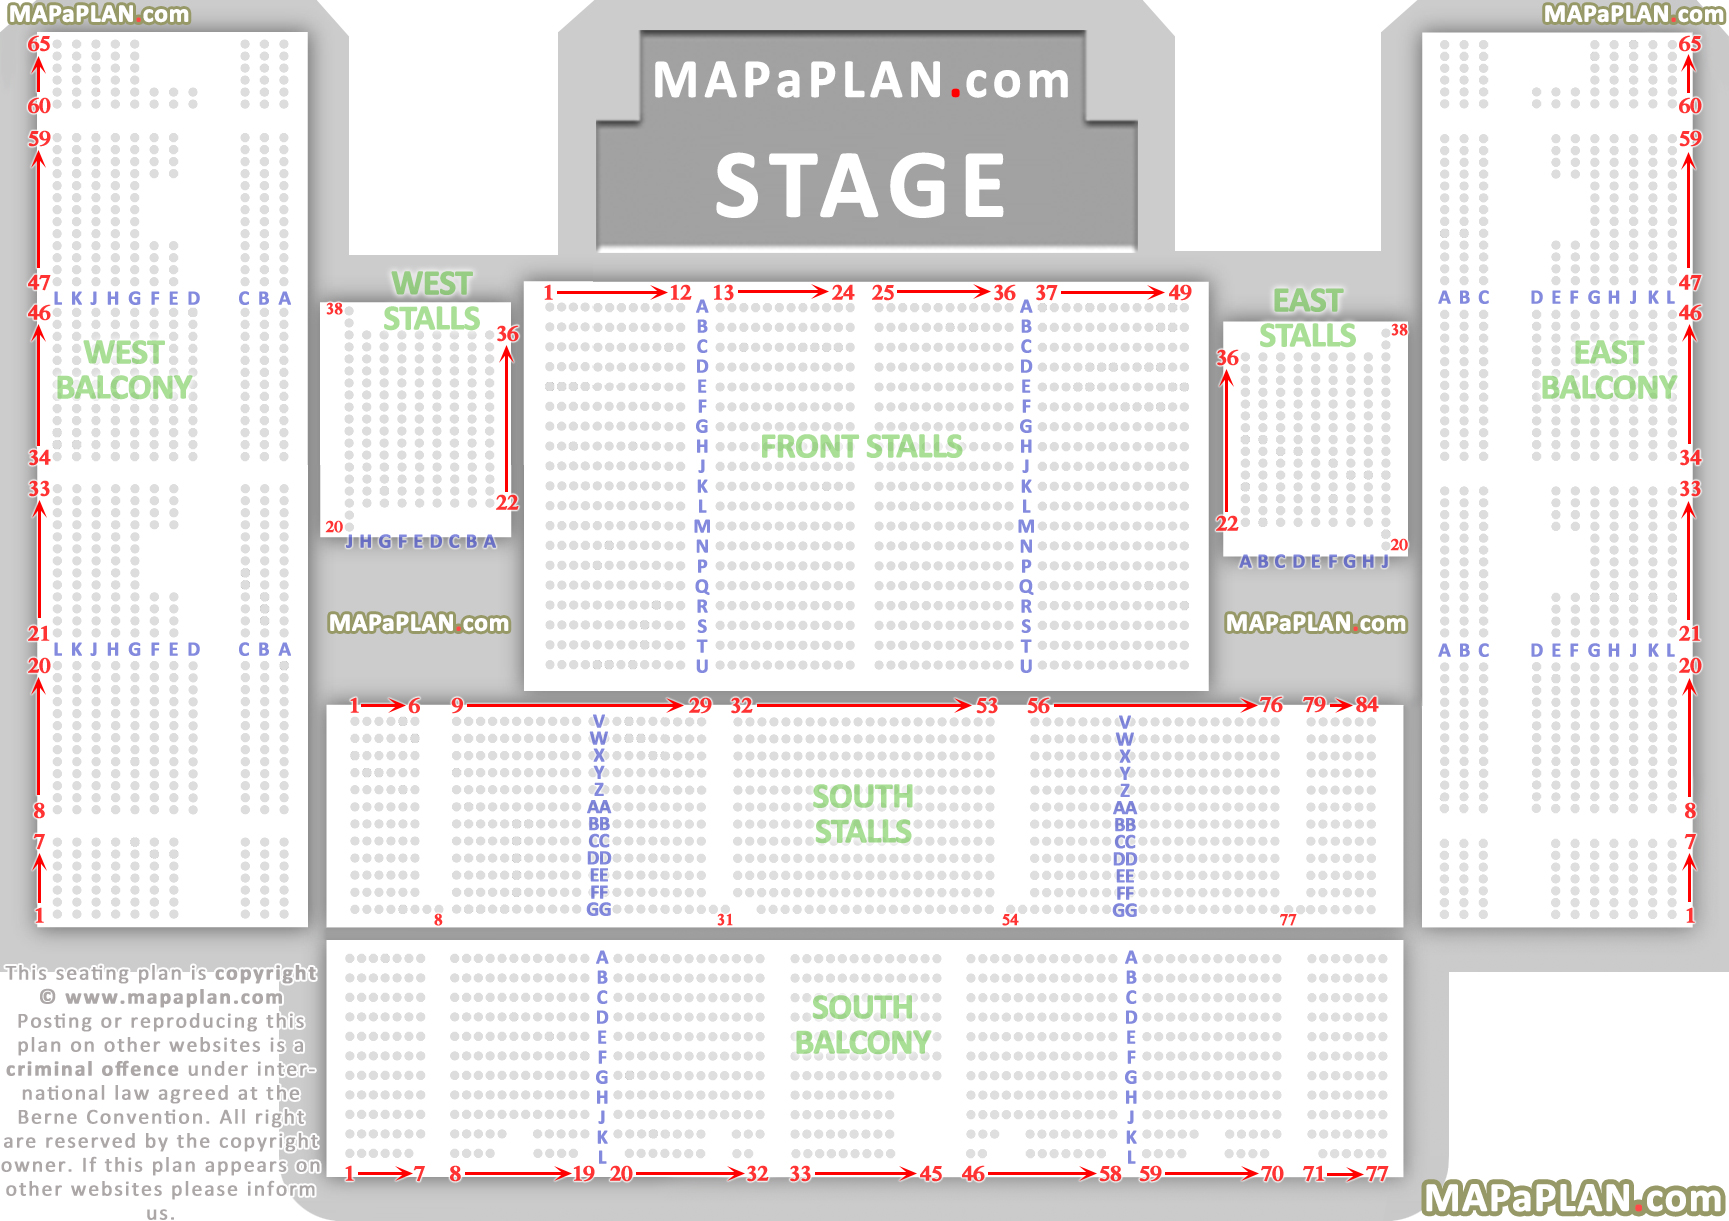 detailed seat row numbers concert chart flat front stalls raised west east south balcony Brighton Centre seating plan